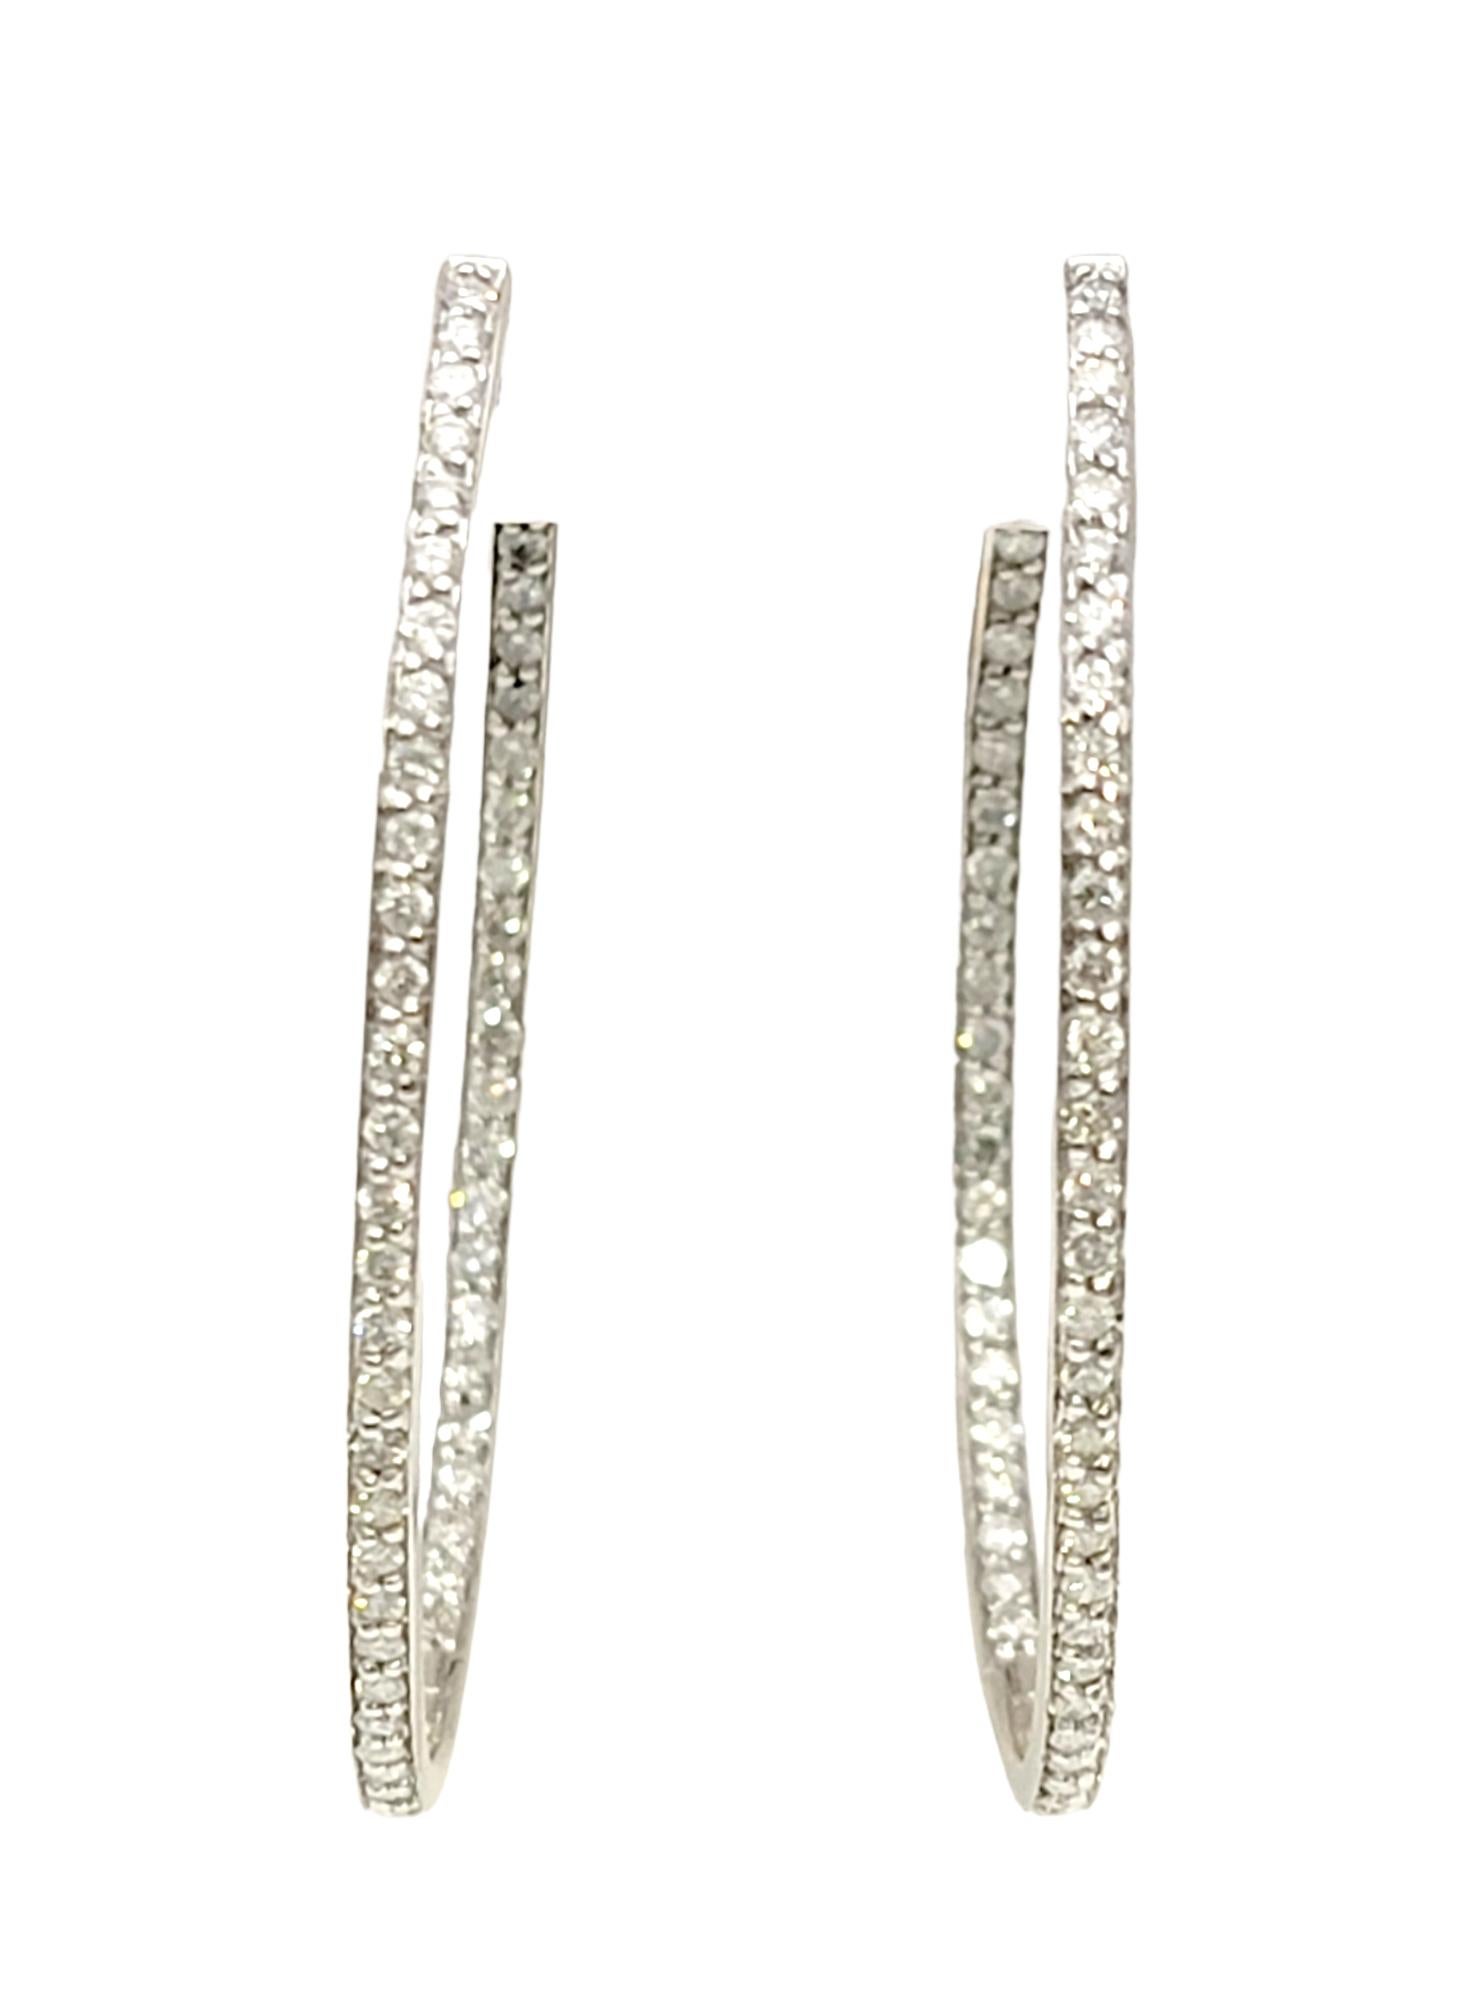 Round Cut Large Inside-Outside Pave Diamond Oval Hoop Earrings in 14 Karat White Gold For Sale